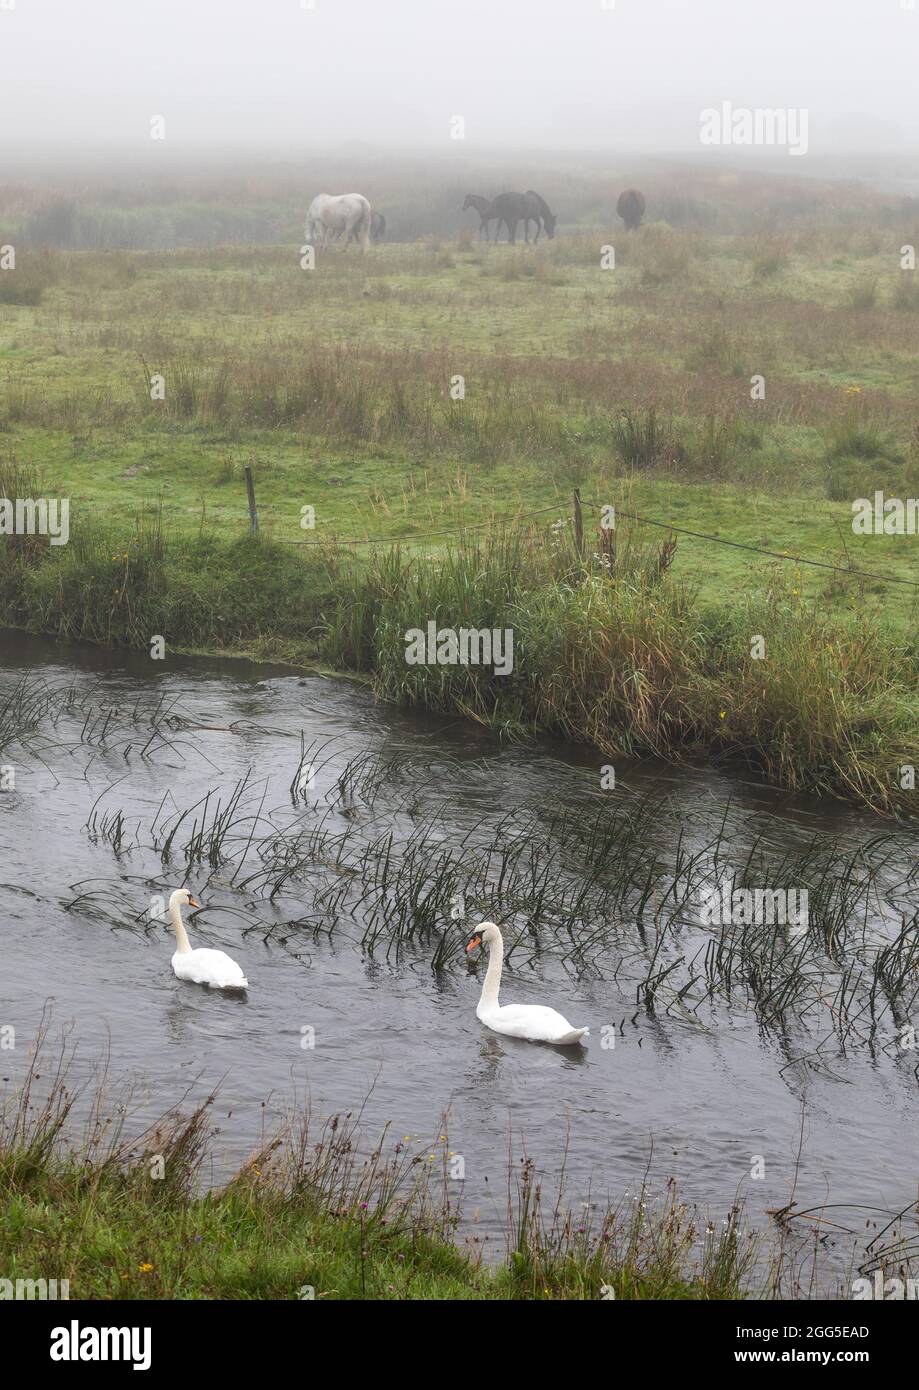 Tregaron, Ceredigion, Wales, UK. 29th August 2021  UK Weather: Swans gliding along the river Teifi as horses graze in the mist on the outskirts of Tregaron in mid Wales, with the forecast of sunshine once the mist clears. © Ian Jones/Alamy Live News Stock Photo